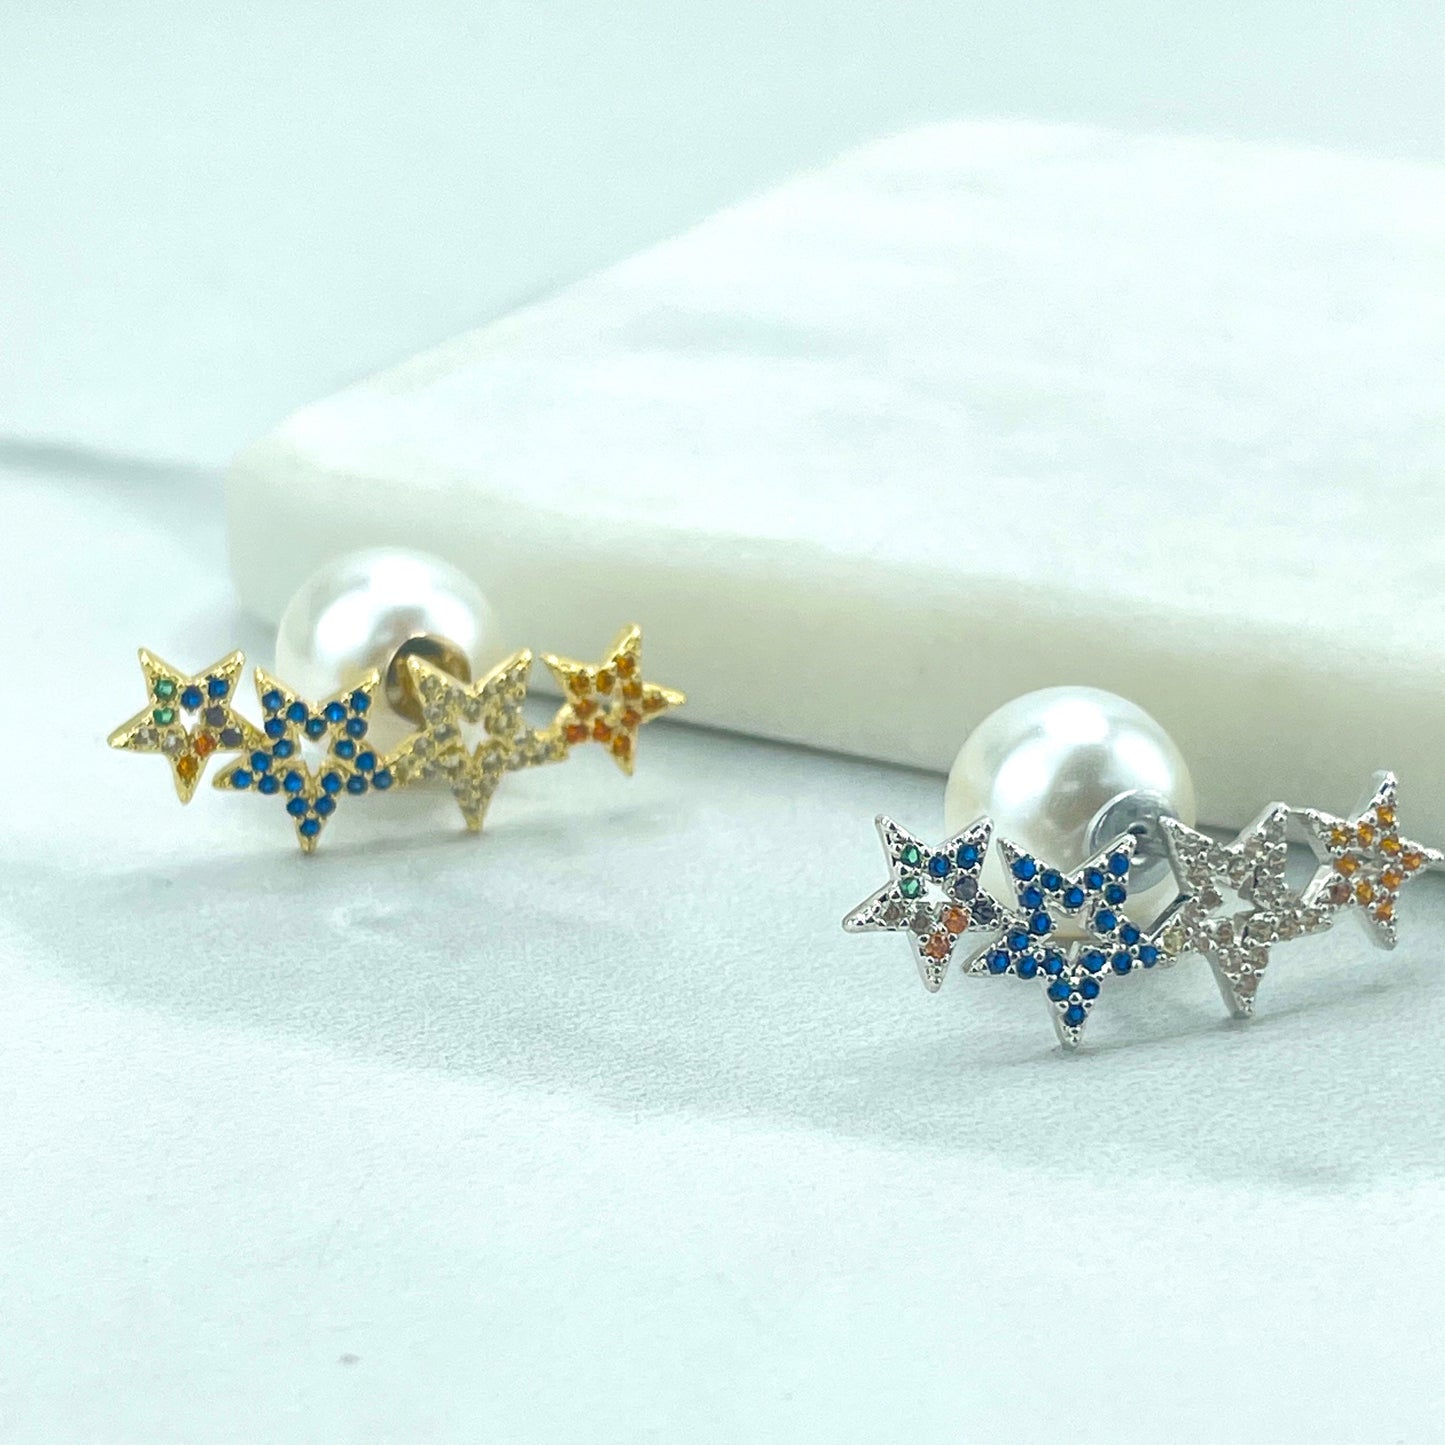 18k Gold Filled or Silver Filled, Colored CZ Stars Ear Climber Design, Ear Jacket, Front Back Stud Earrings, Double Sided Wholesale Jewelry